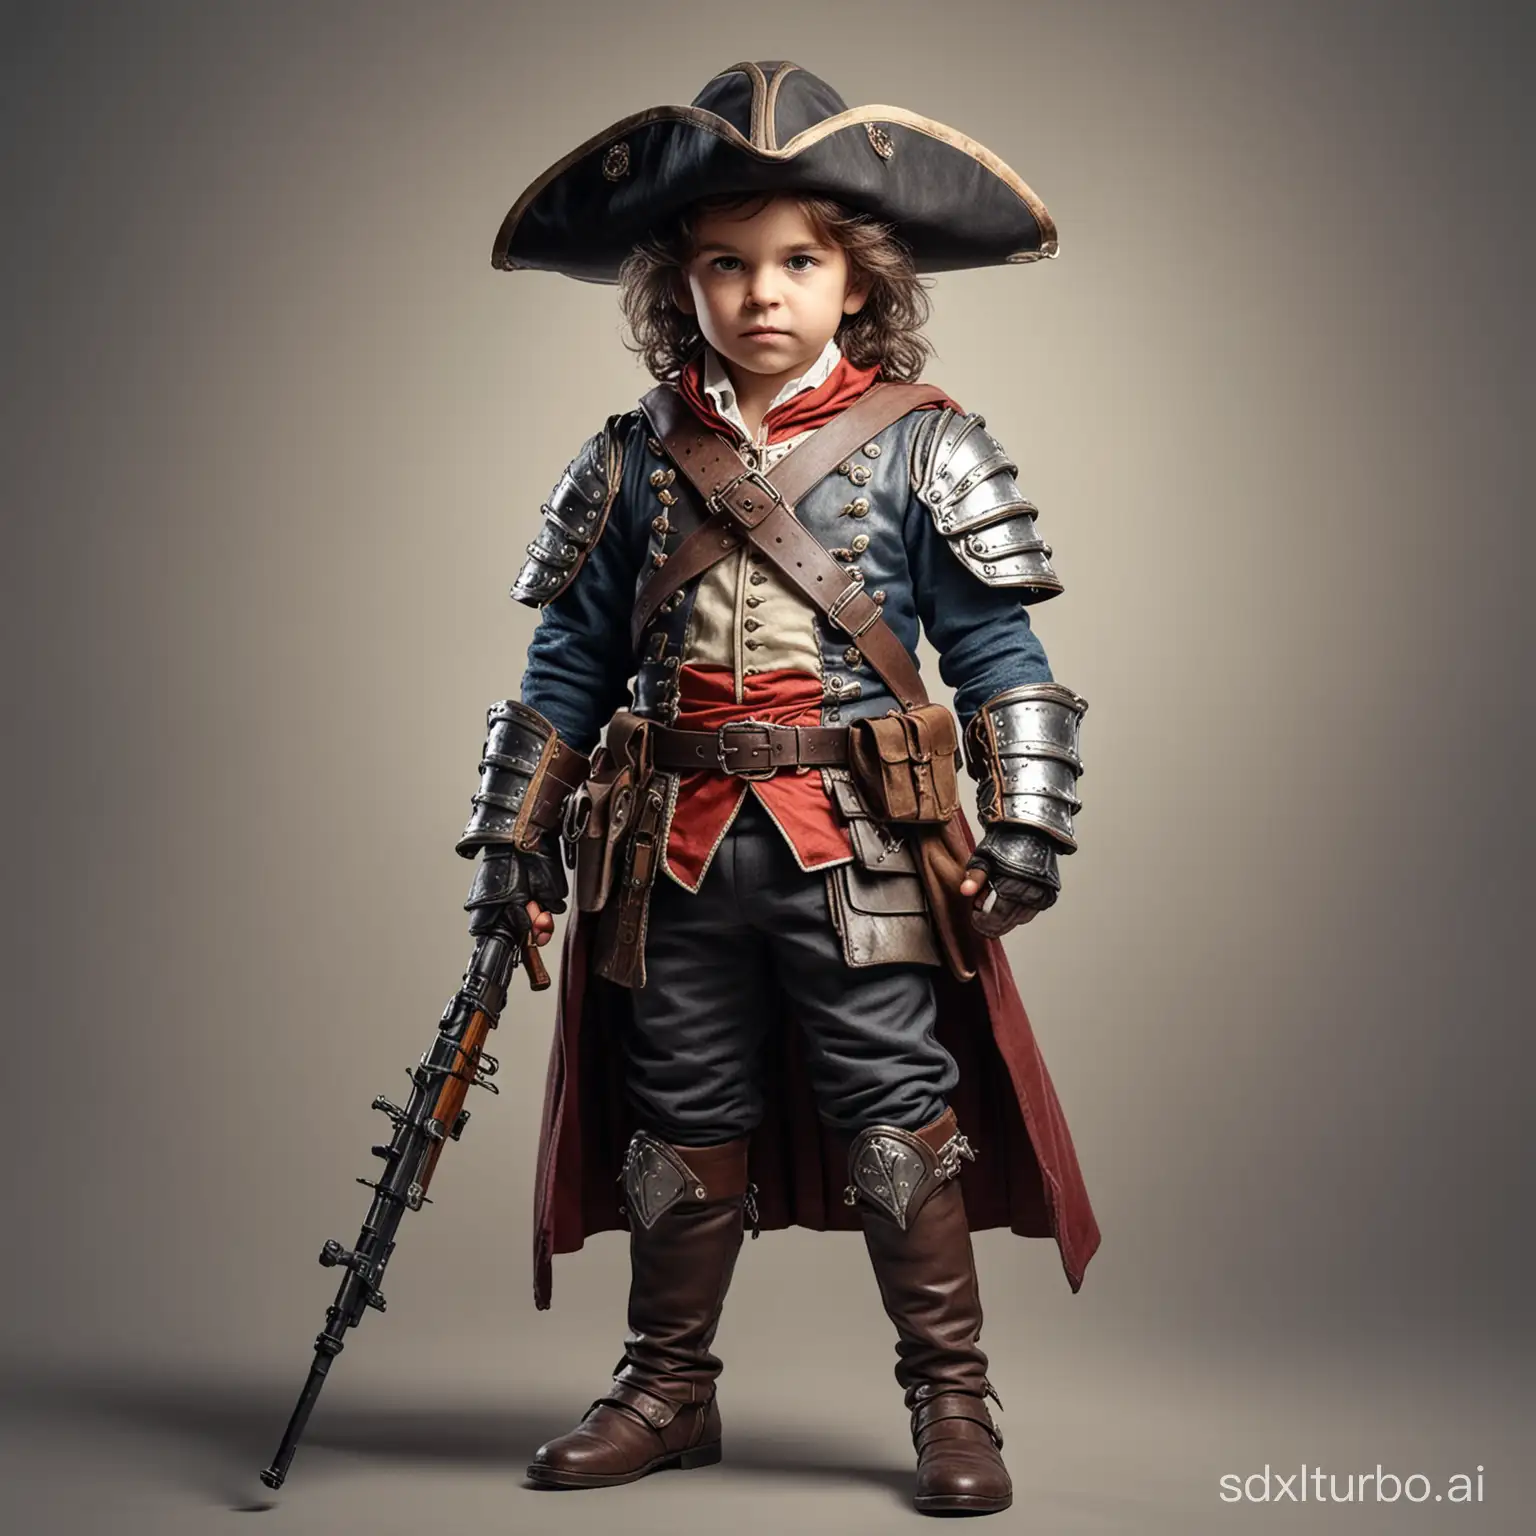 Little child musketeers d'artagnan with masculine face, wearing full armor with assault rifle, game character, stands at full height